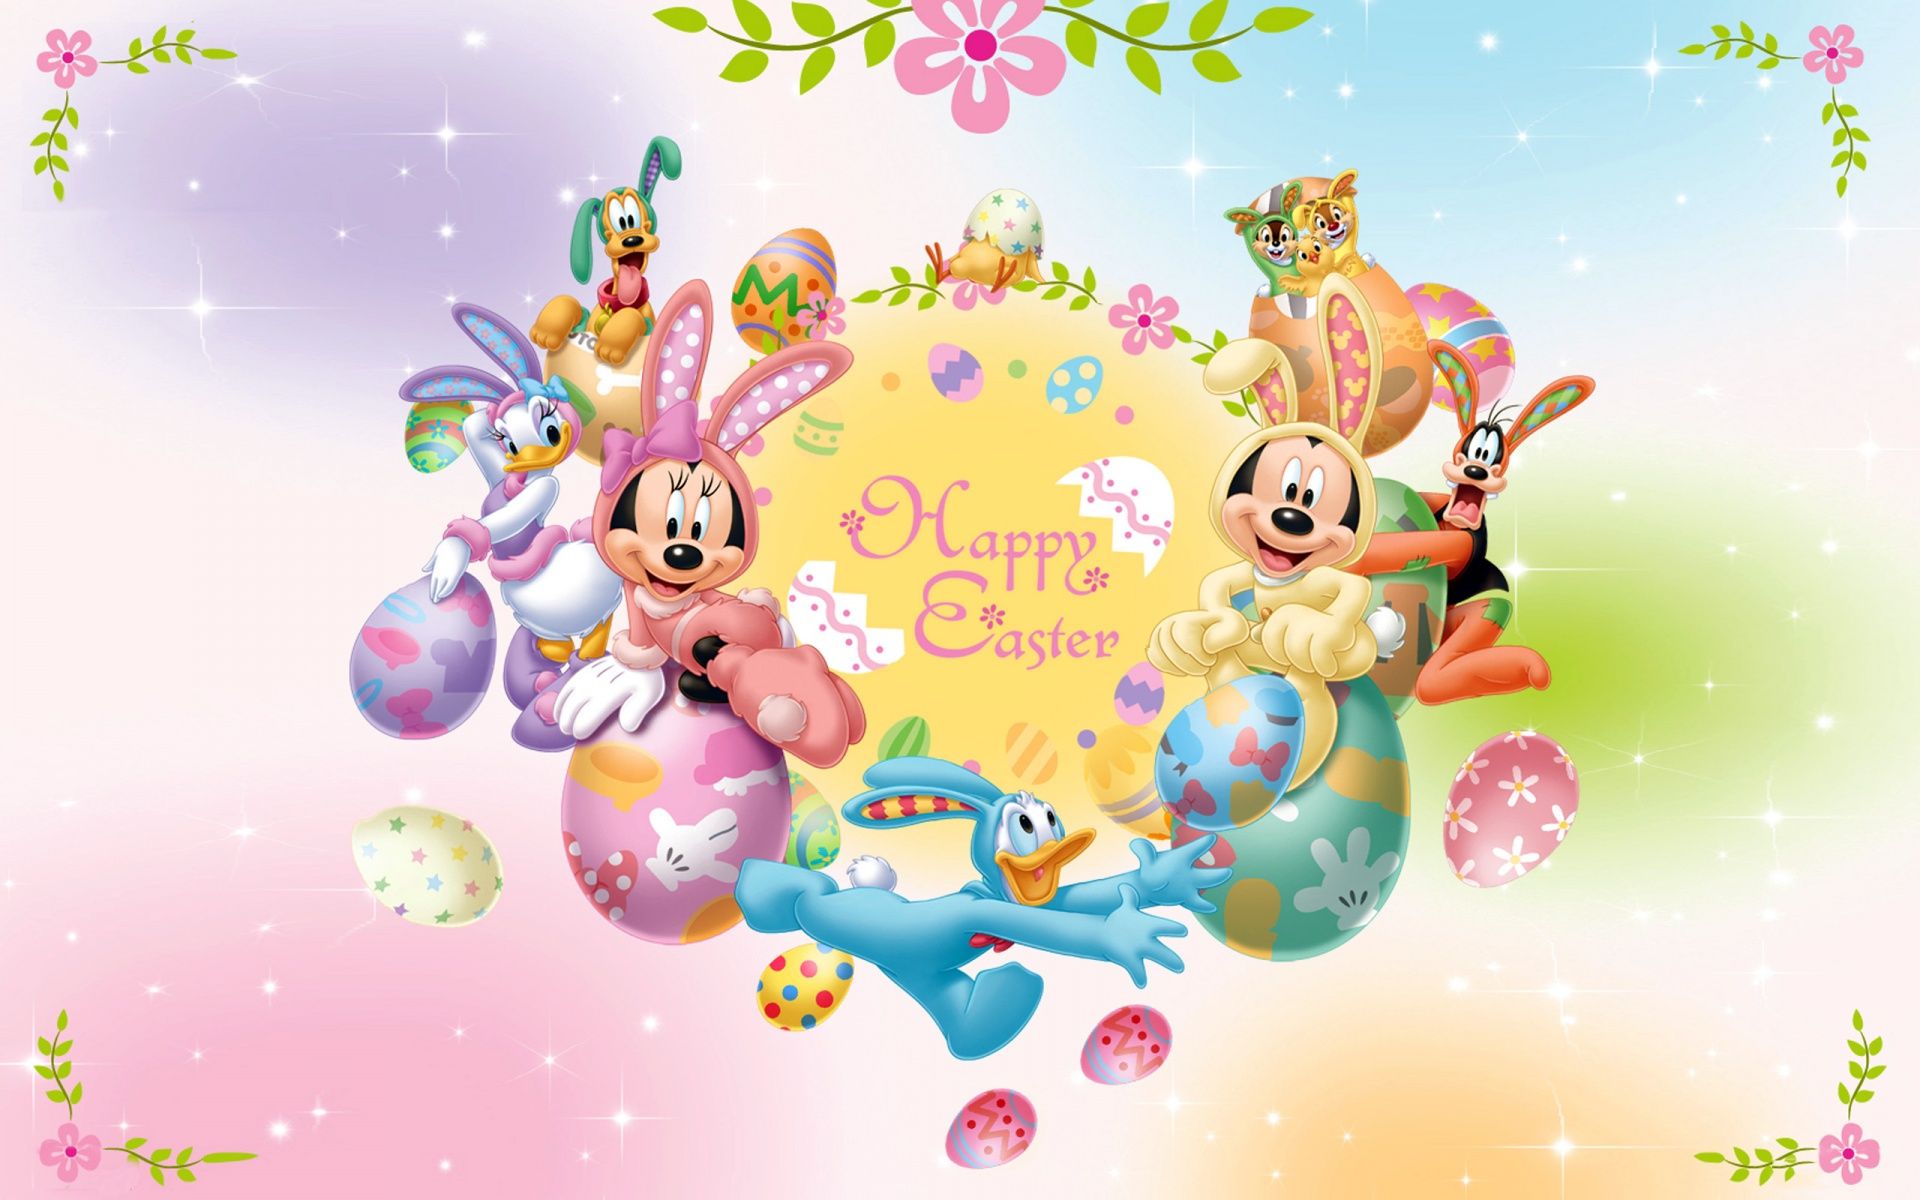 Happy Easter 2020 Image, Quotes, Wishes, Messages, SMS